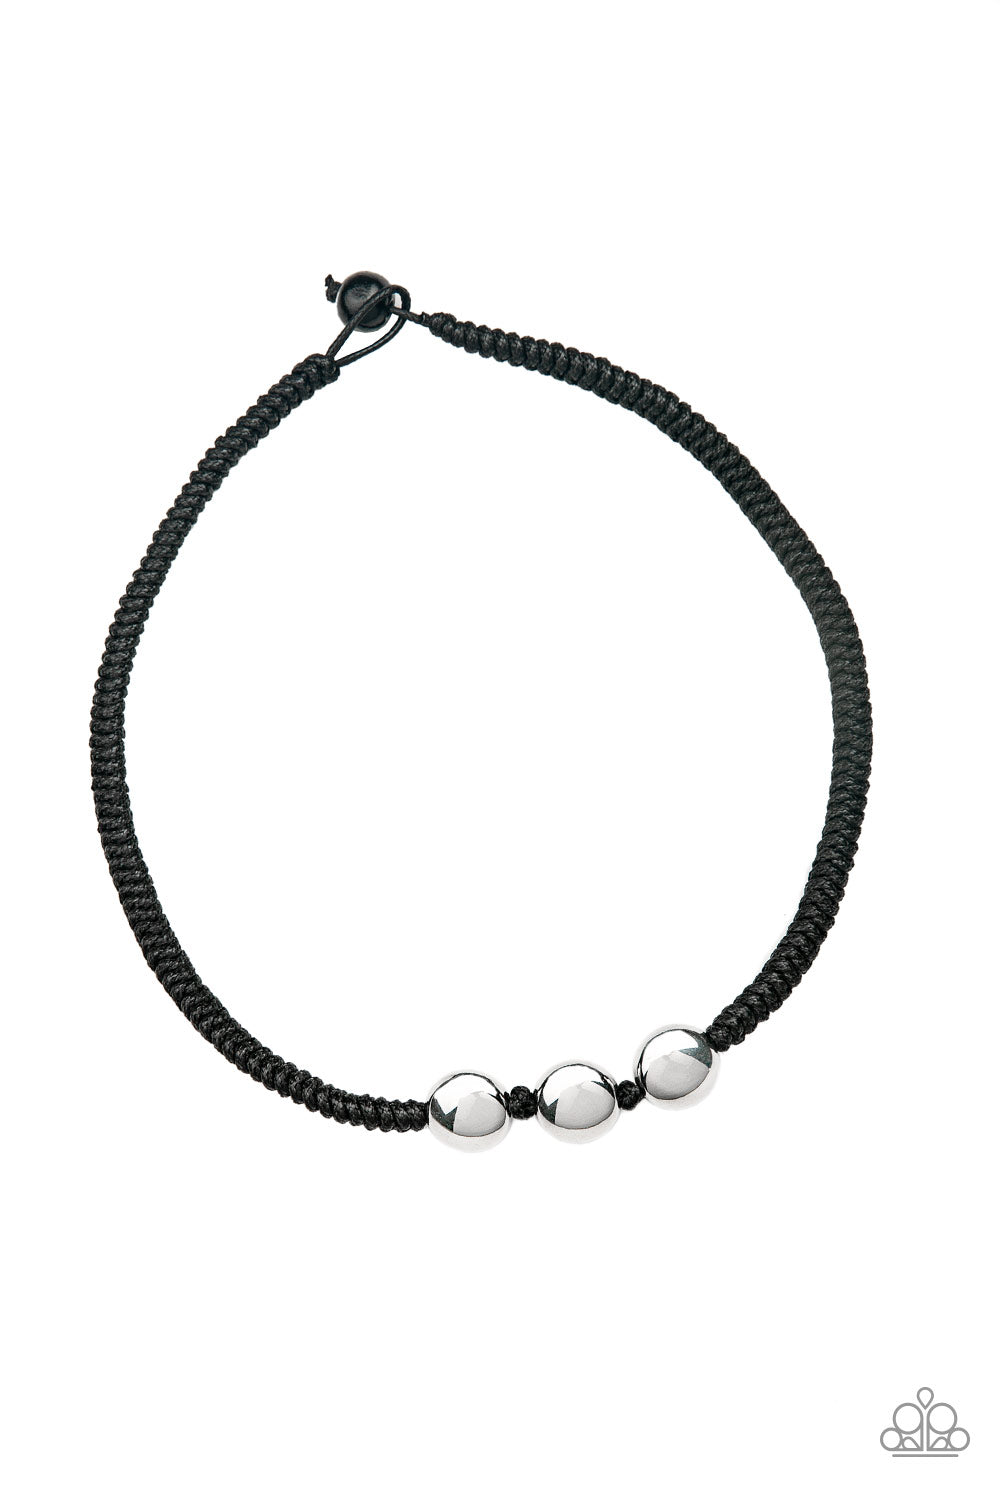 . Pedal To The Metal - Black Urban Necklace